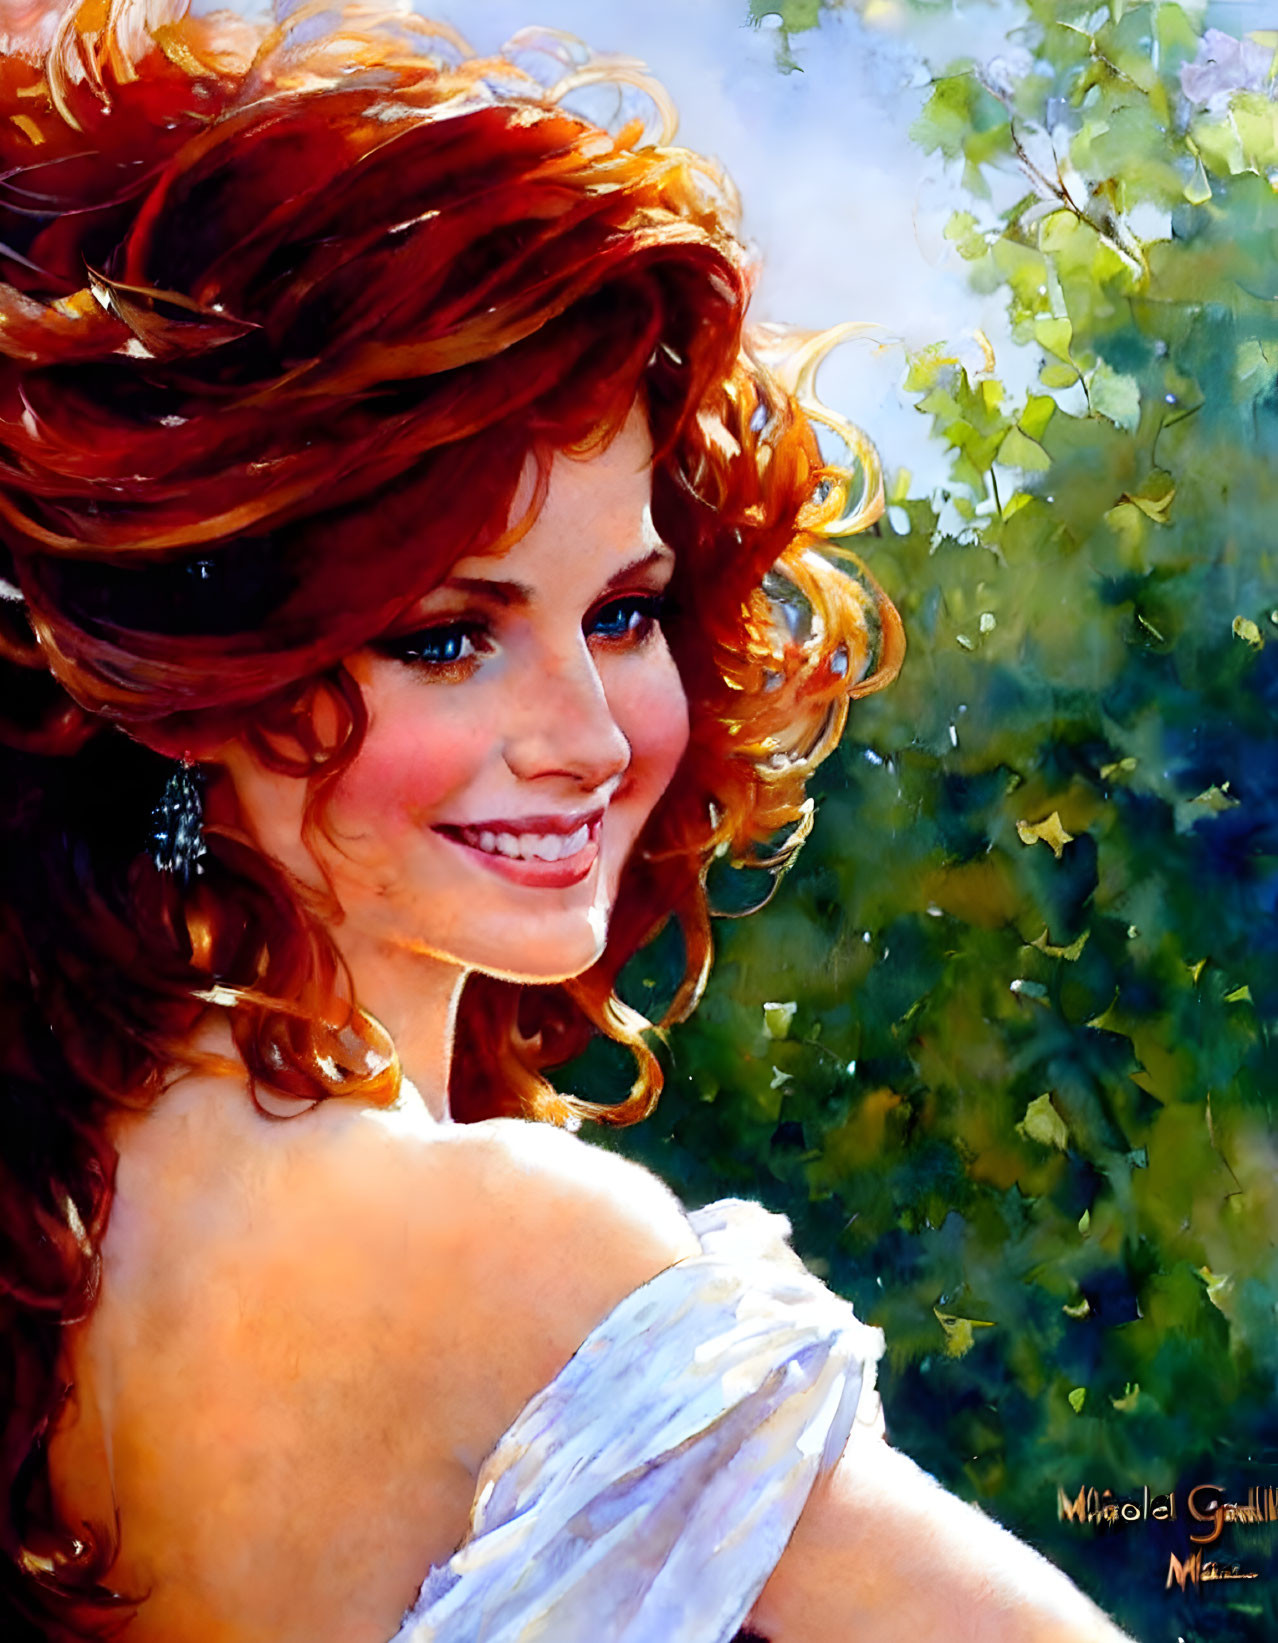 Smiling woman with red hair in white dress against sunny foliage